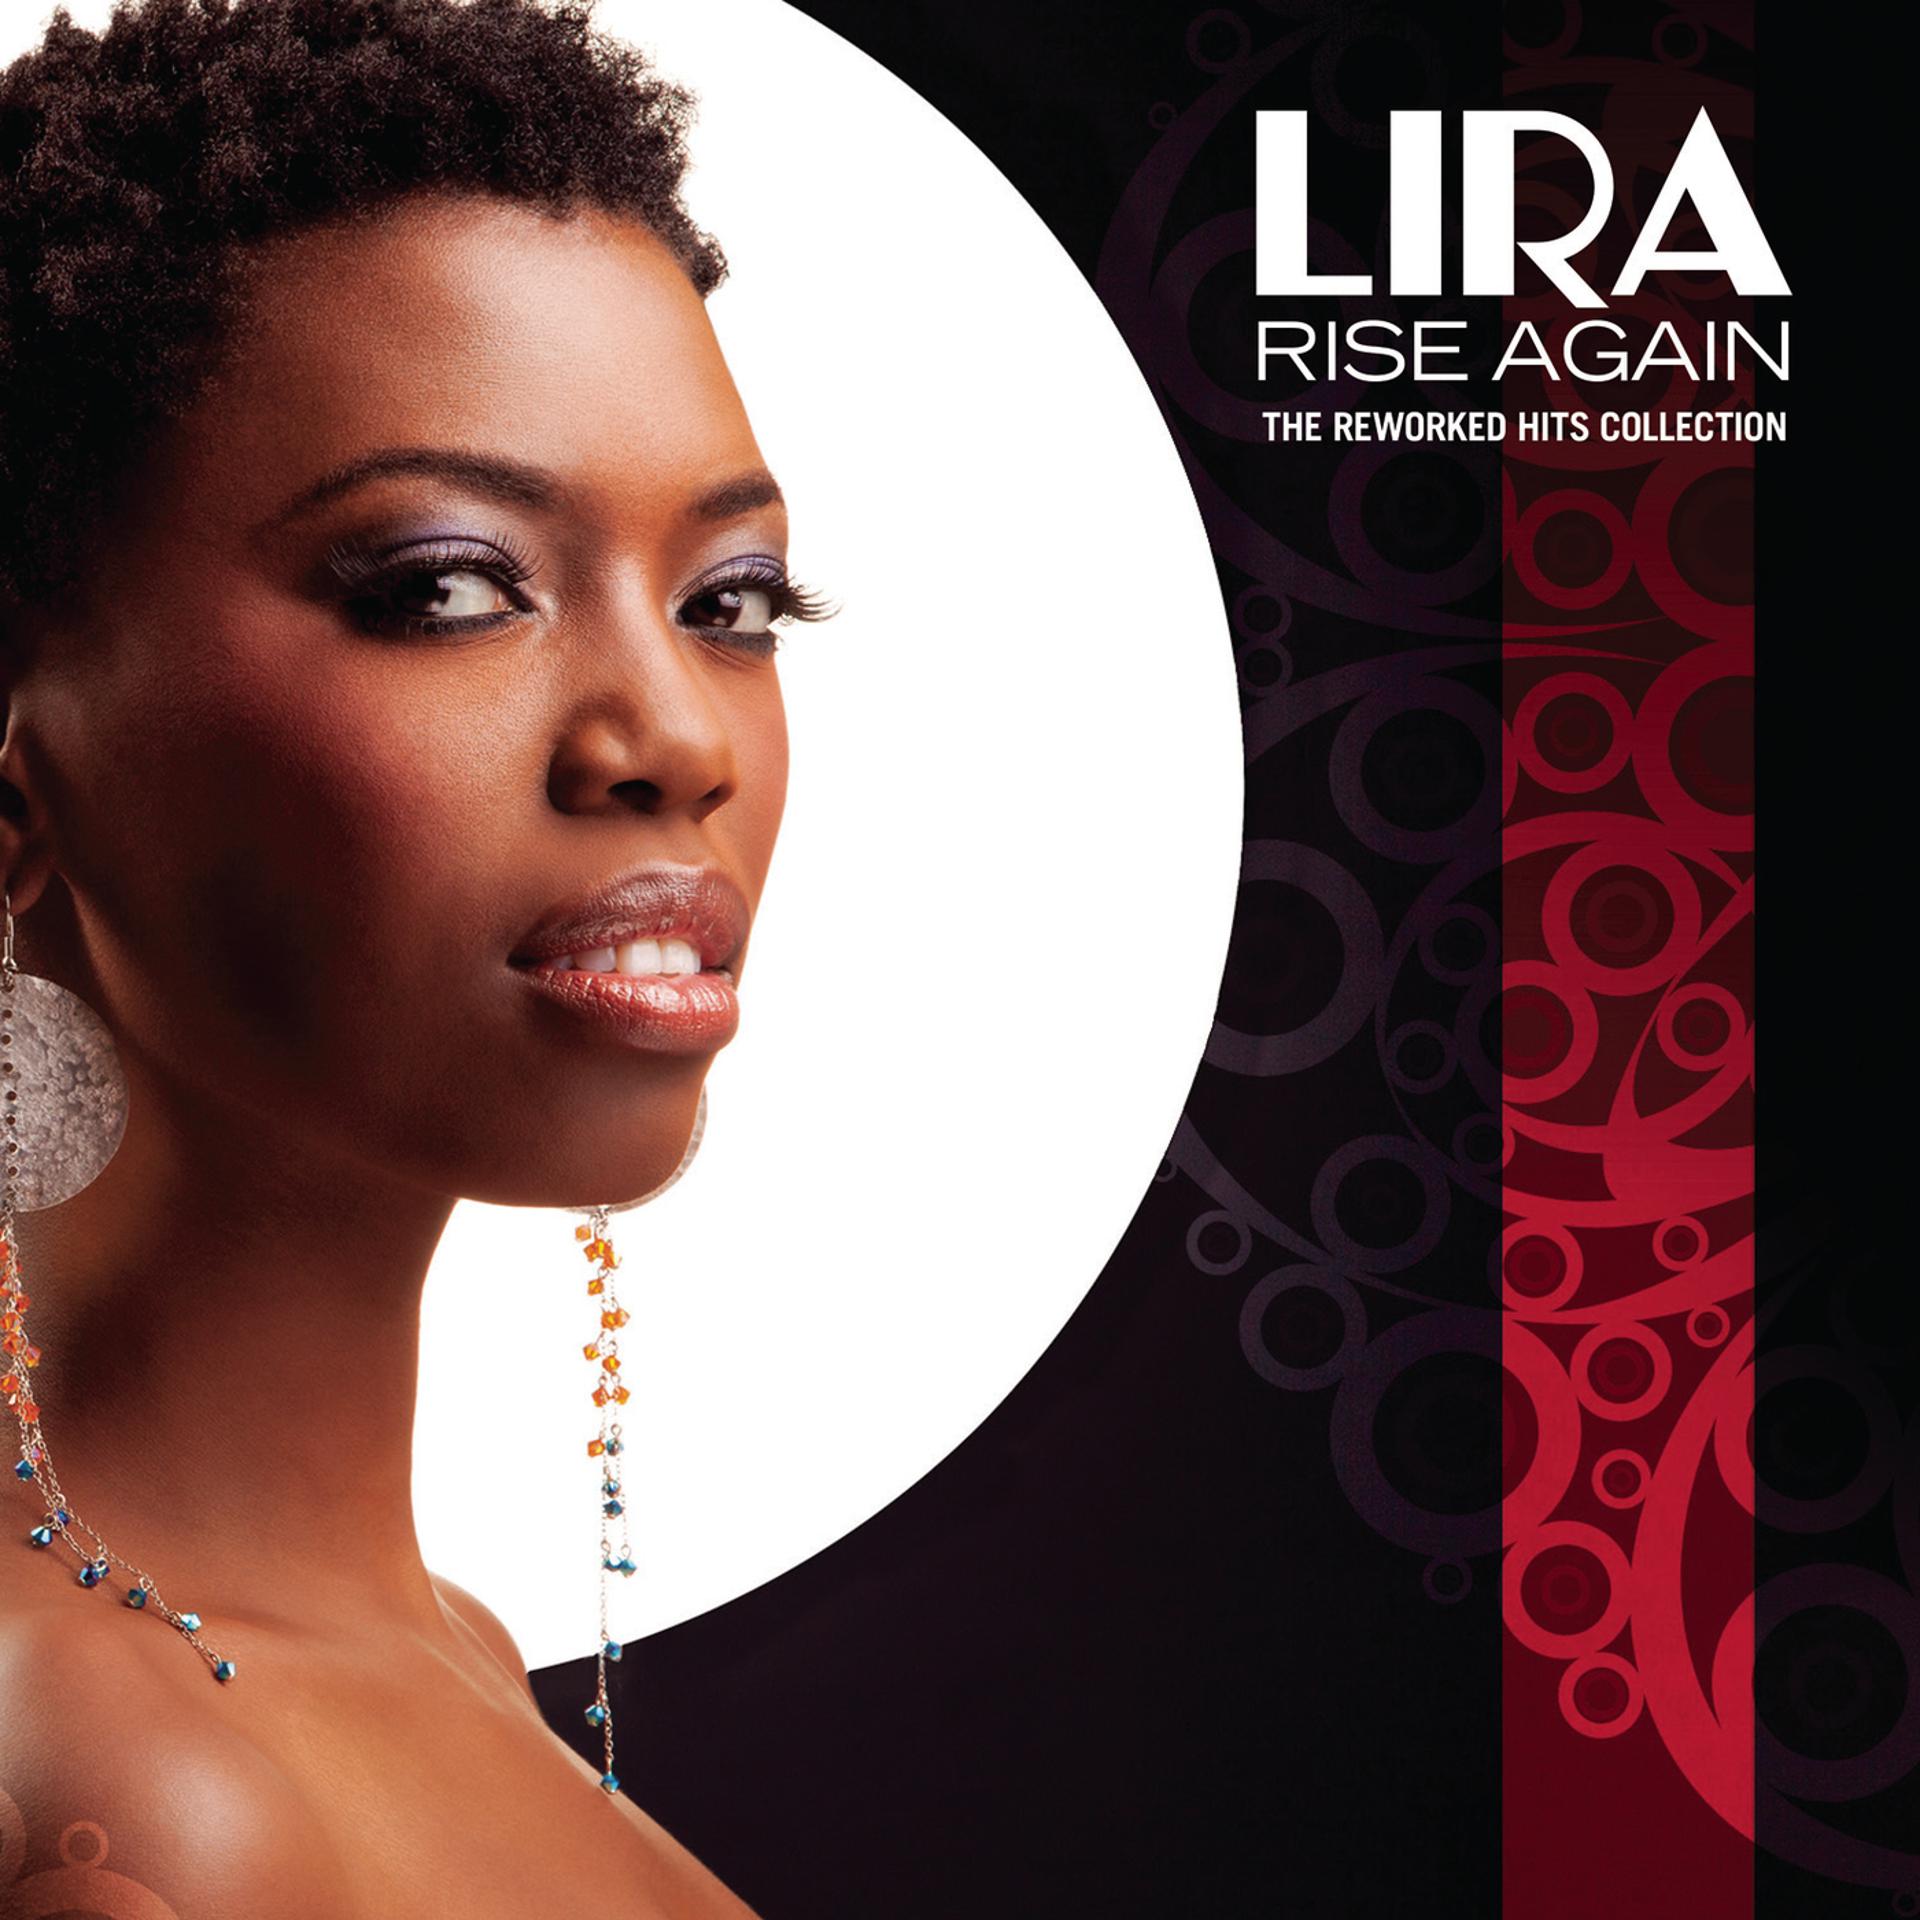 Постер альбома "Lira" Rise Again - The Reworked Hits Collection